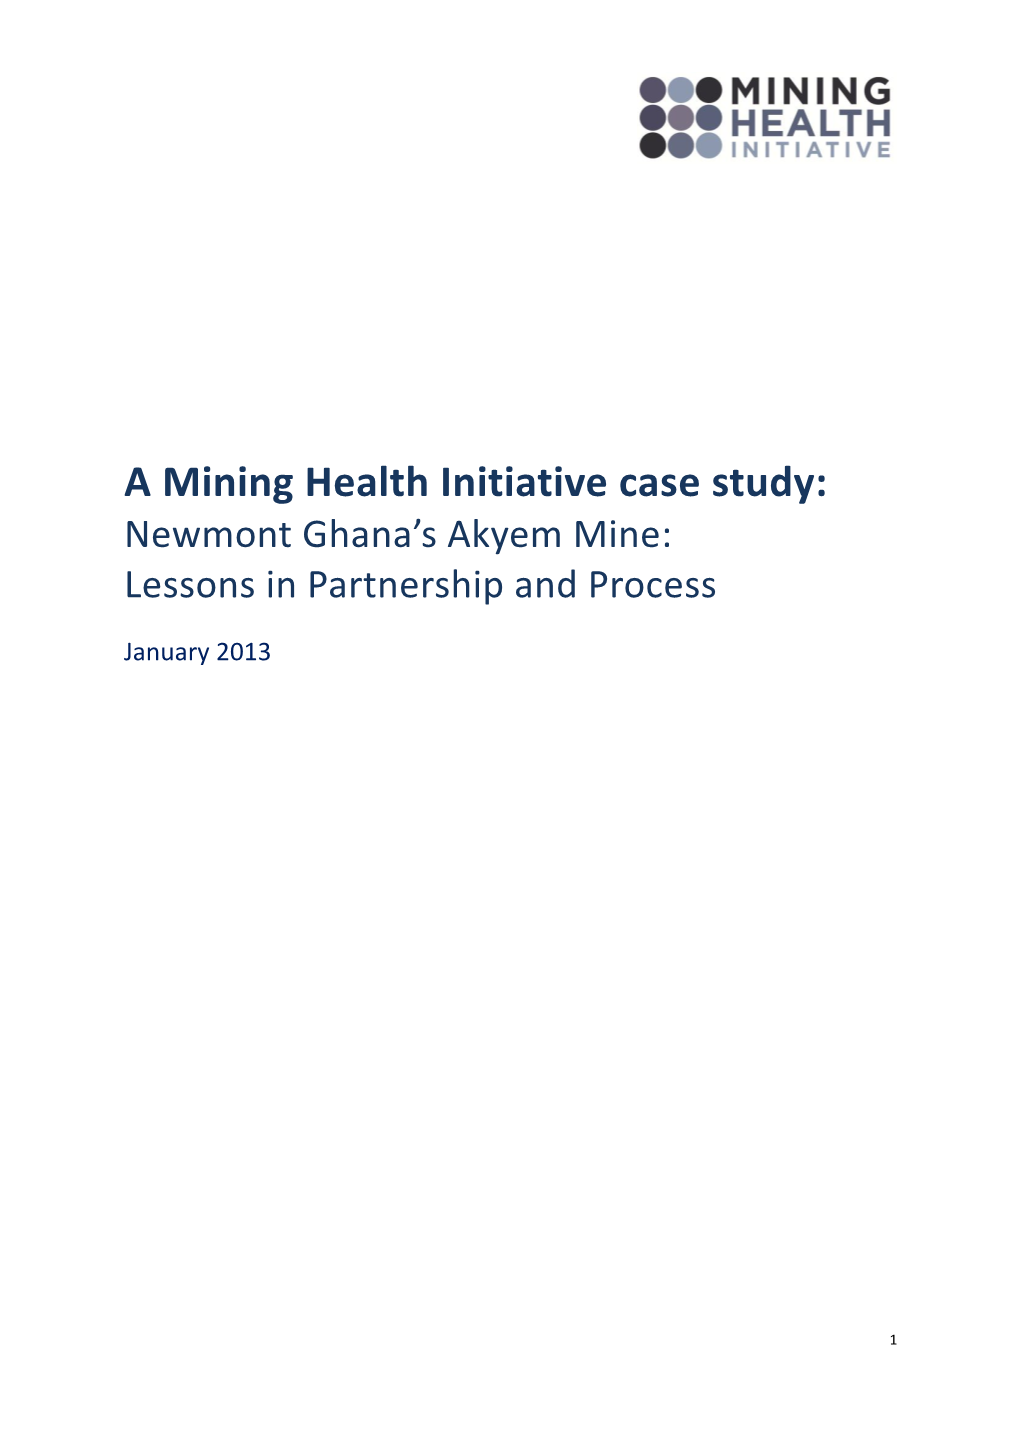 A Mining Health Initiative Case Study: Newmont Ghana’S Akyem Mine: Lessons in Partnership and Process